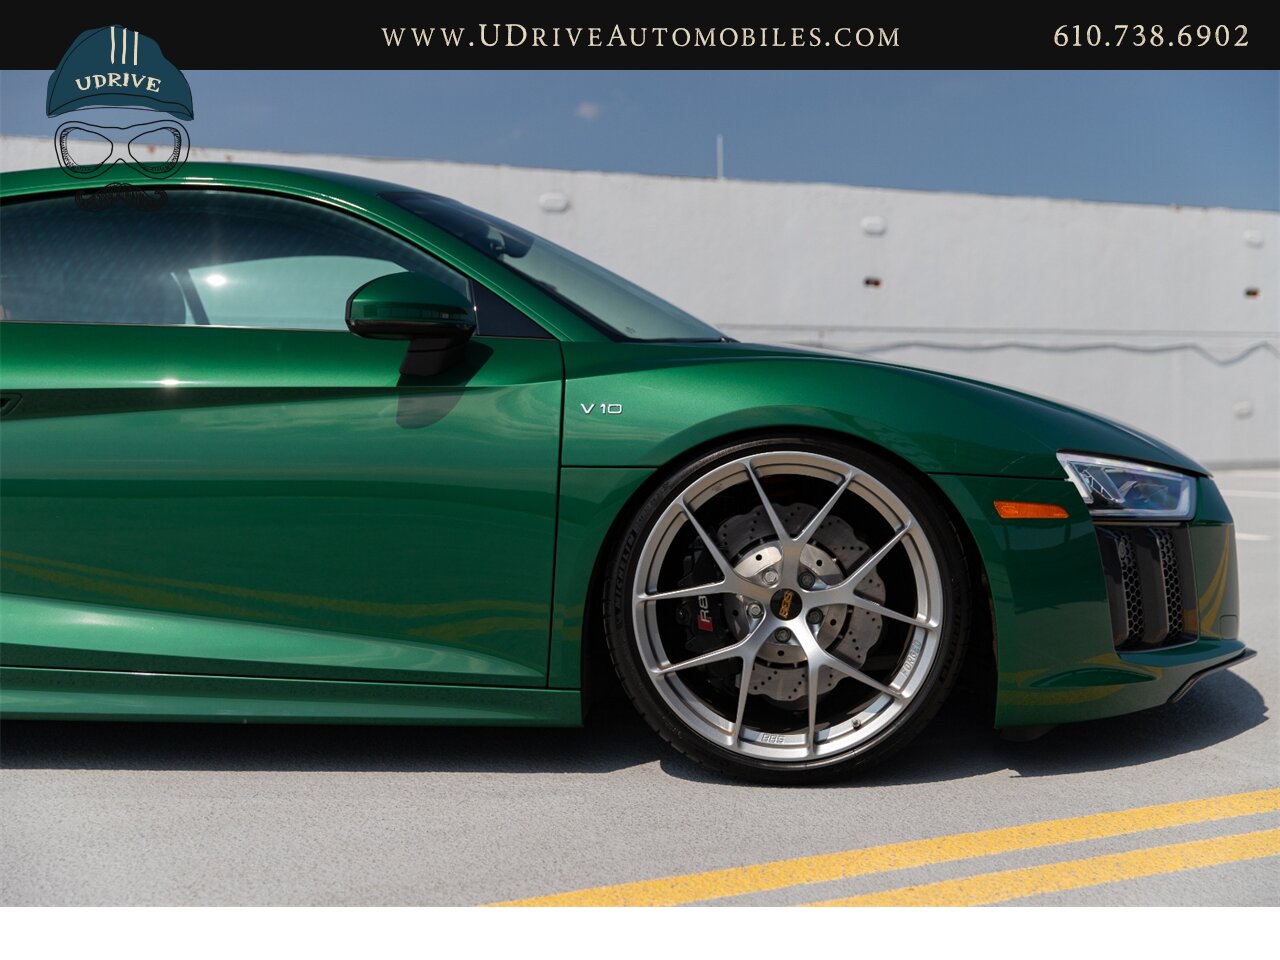 2017 Audi R8 Audi Exclusive Avocado Green Vermont Brown Leather  Diamond Stitching V10 Carbon Fiber - Photo 18 - West Chester, PA 19382